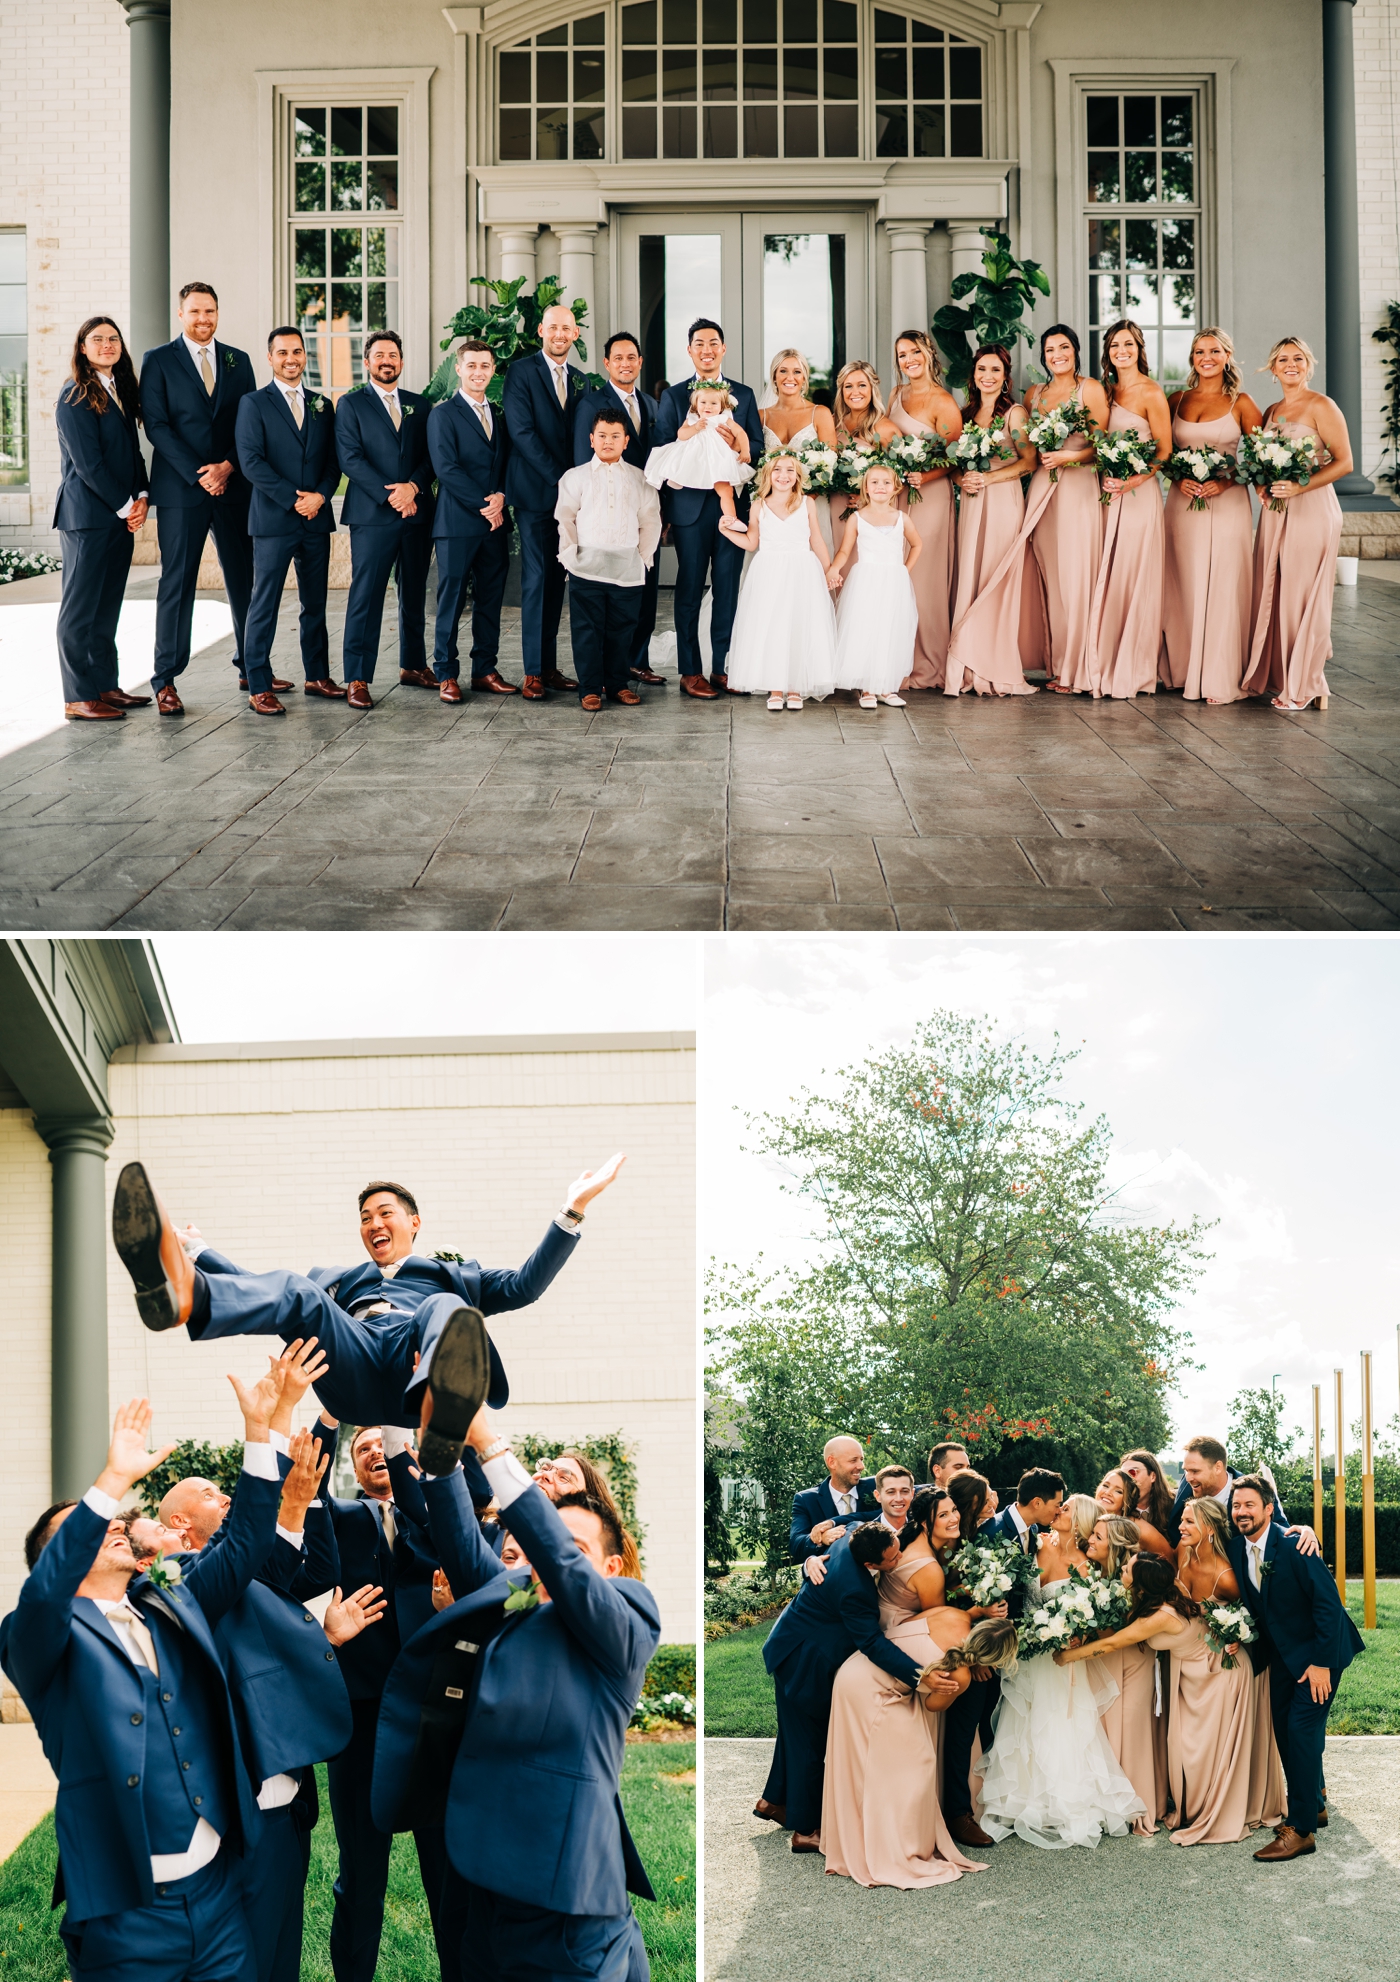 Bridal party portraits with bridesmaids in blush gowns